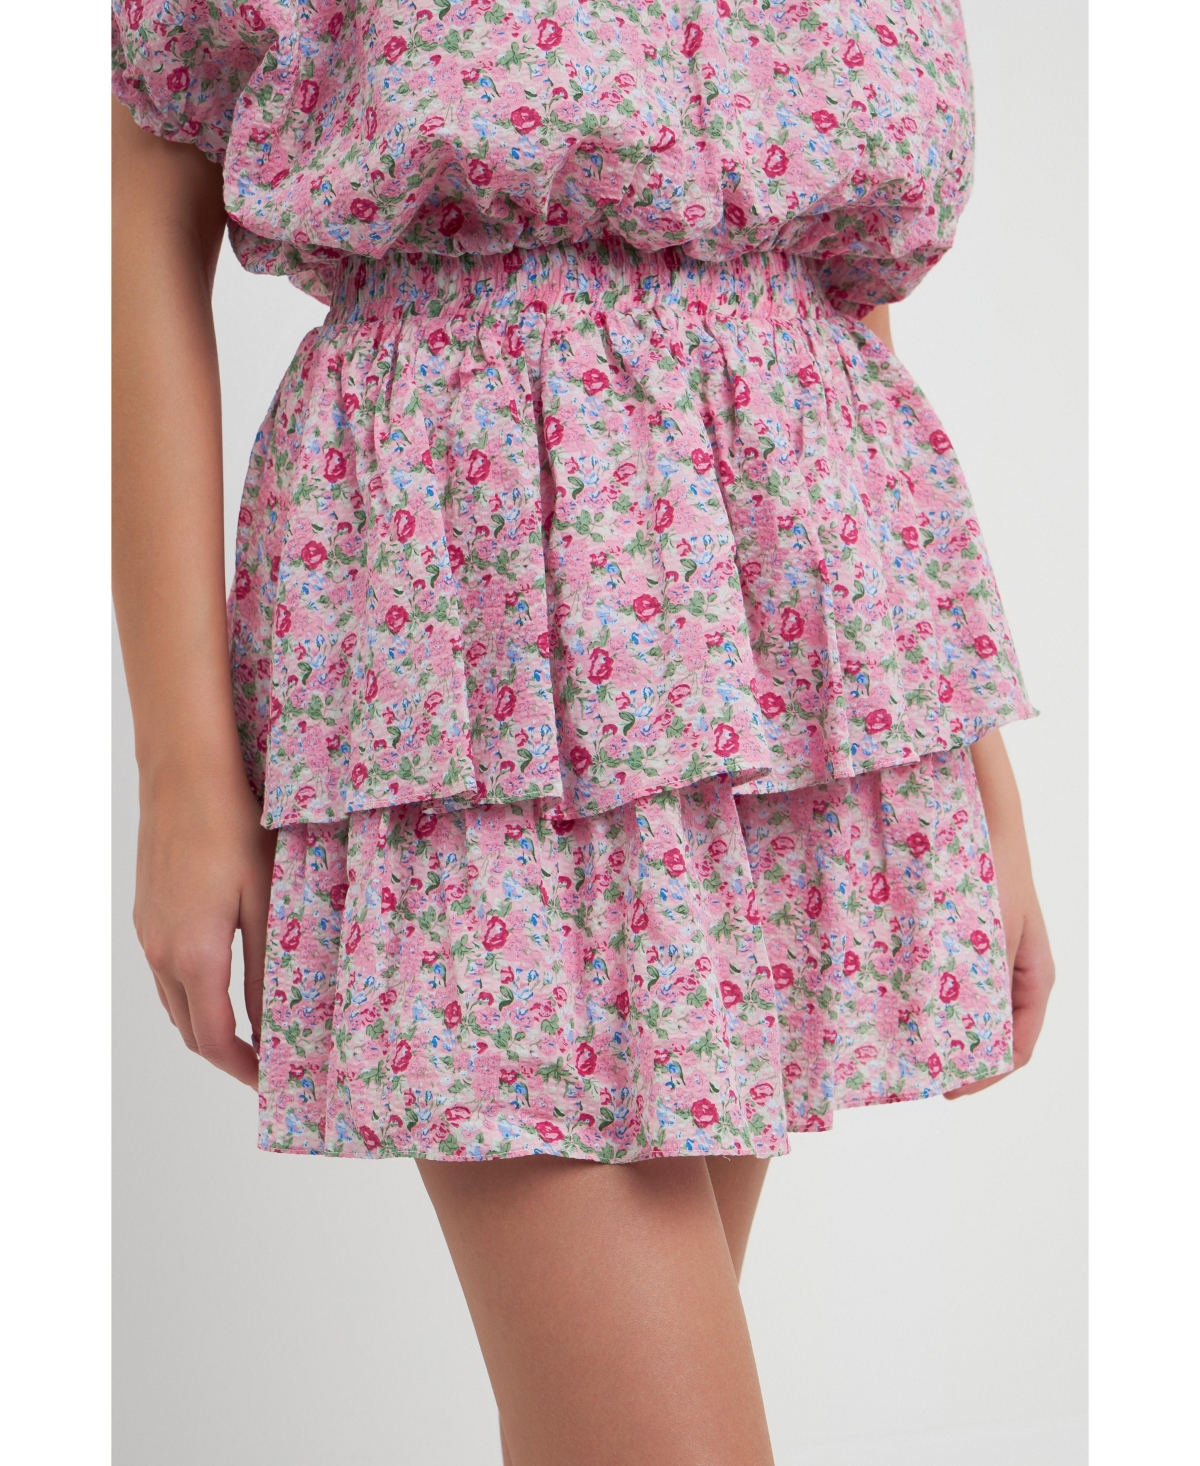 Women's Floral Tiered Mini Skirt - Pink multi